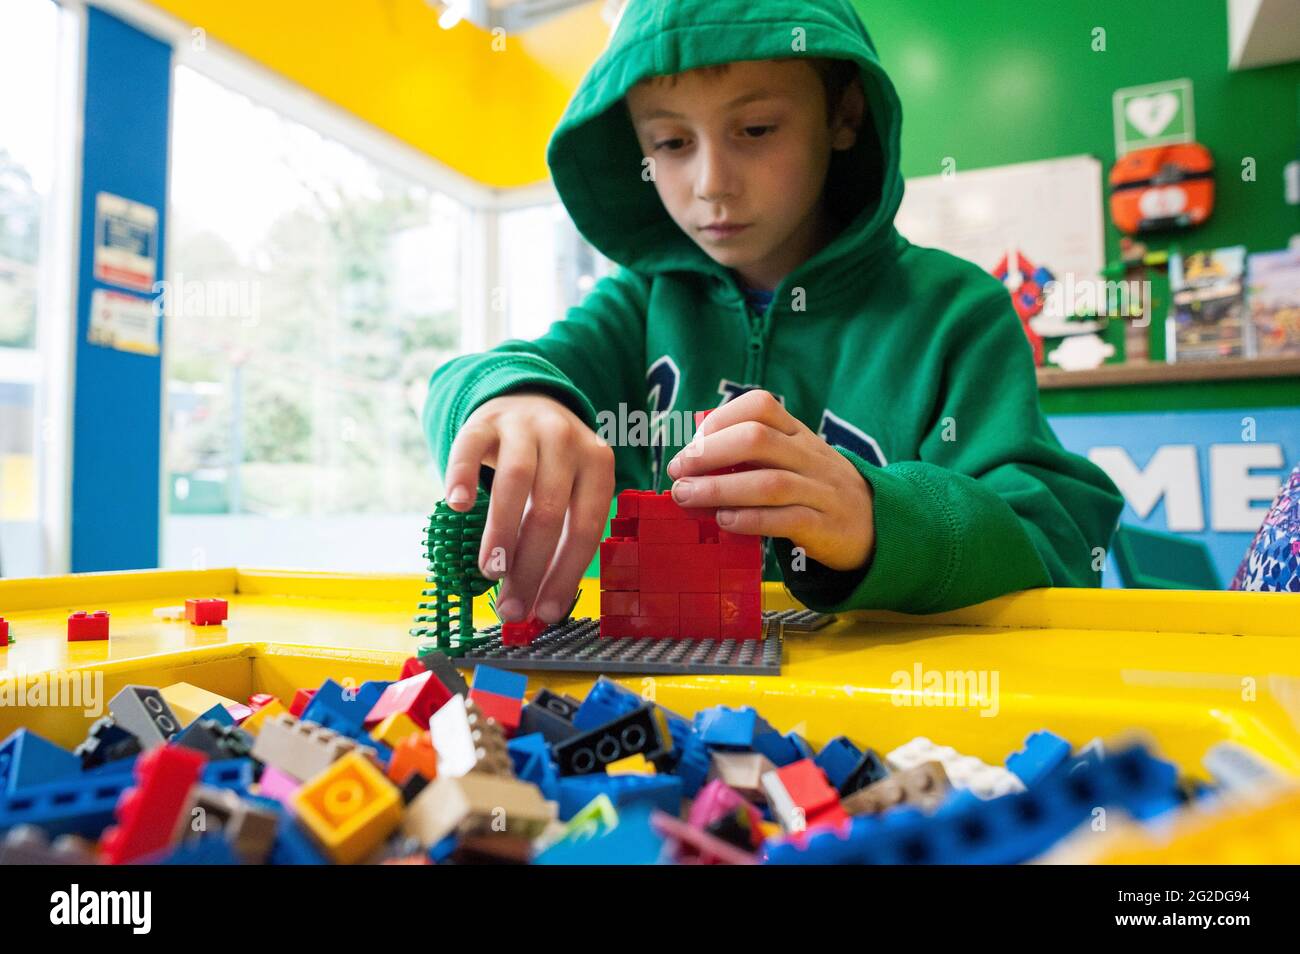 Kids playing with lego toys Stock Photo